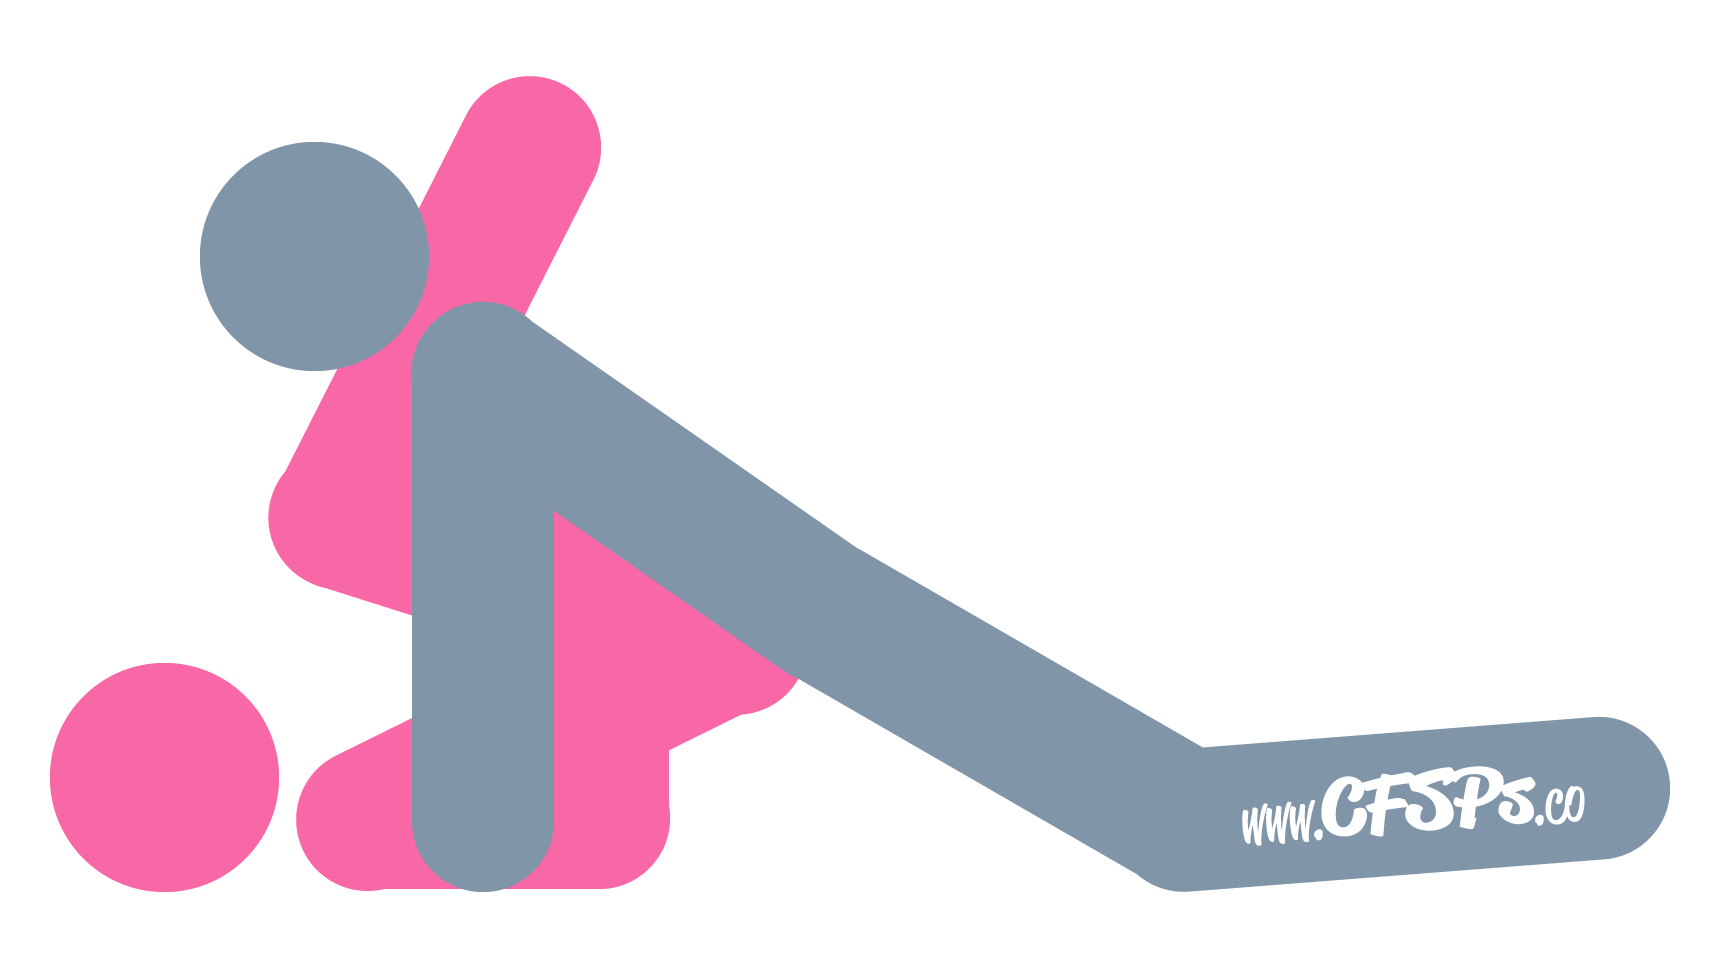 This stick figure image depicts a man and woman having sex in the Snail sex position. The woman is lying on her back with her knees brought halfway to her chest. The man is lying between her legs, and her feet are pressing against his shoulders. Her pelvis is being lifted back as he's leaning forward and supporting his upper body with his arms near her shoulders.